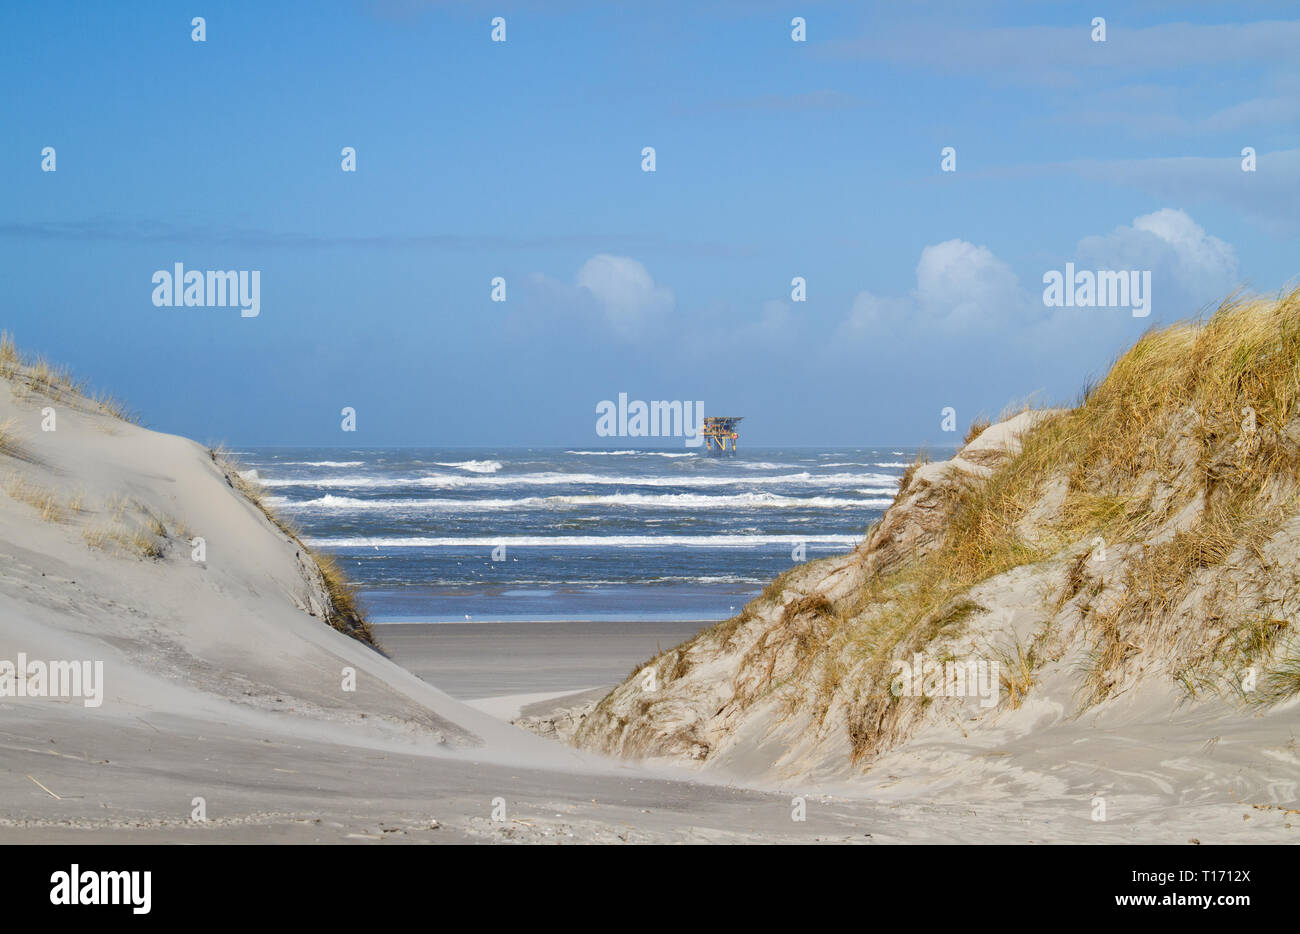 Offshore production platform near the Dutch island Ameland, dunes, beach and breaking waves in the foreground Stock Photo